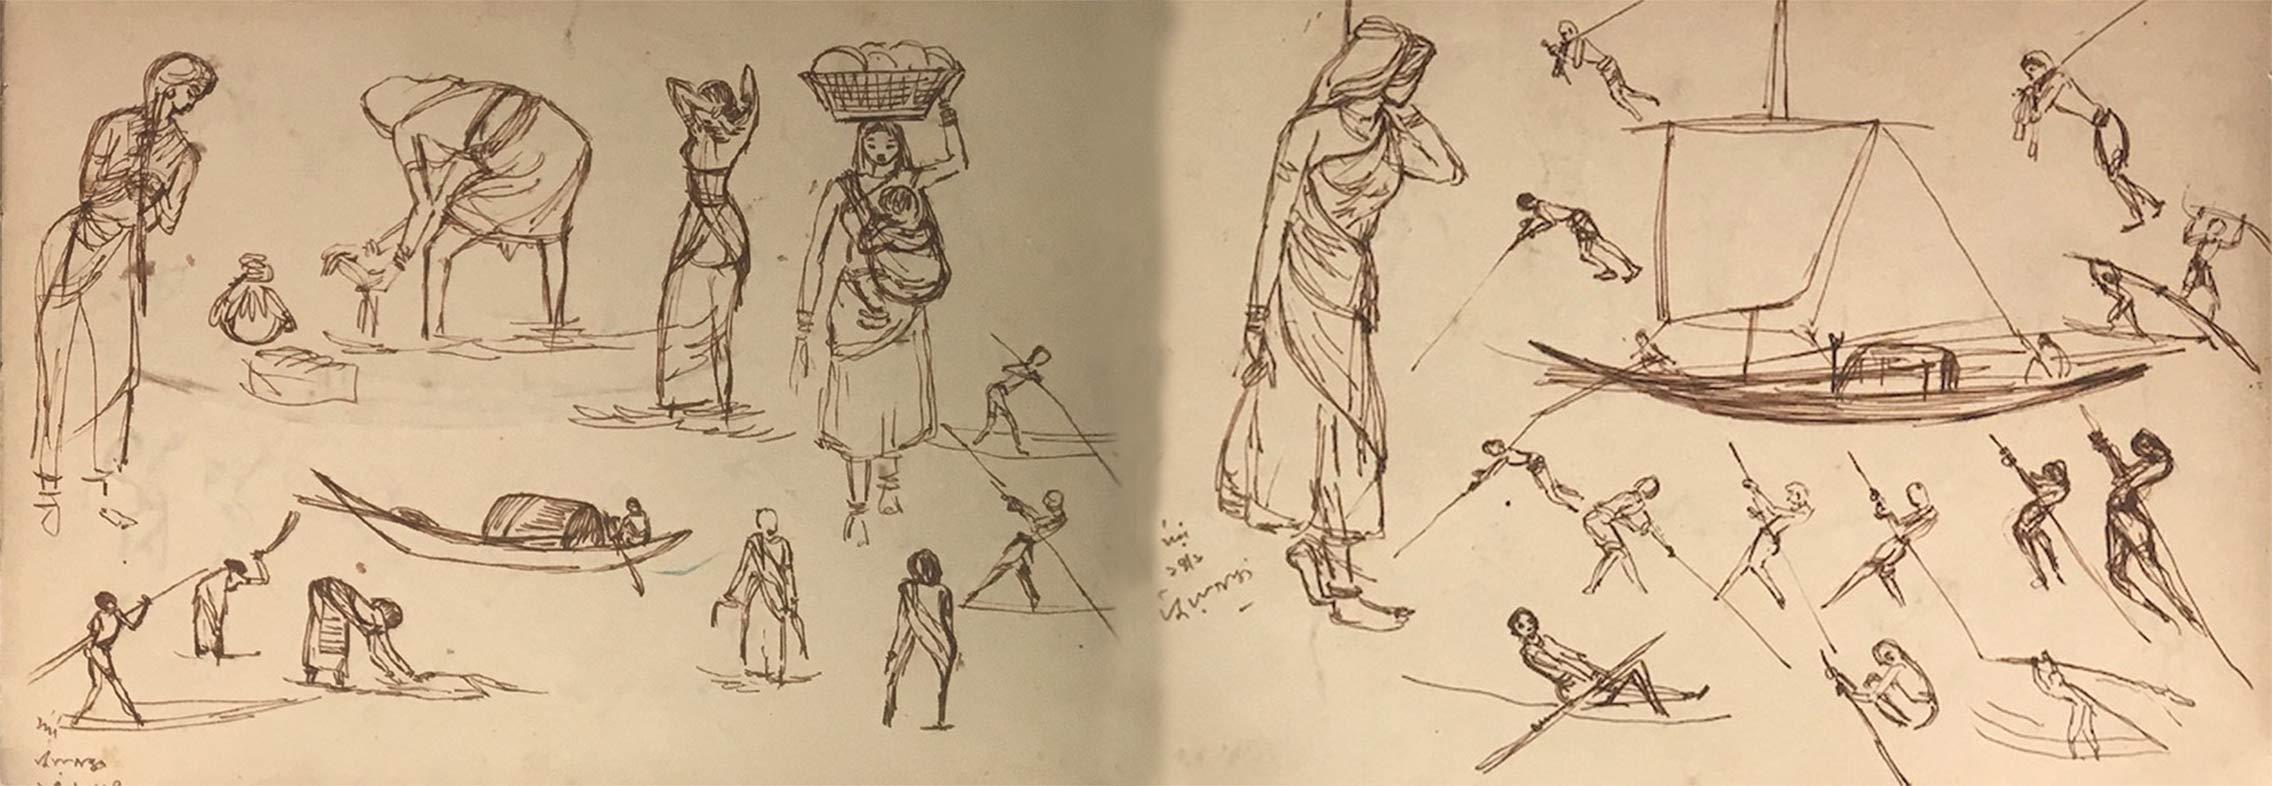 Indian Figurative, Drawing, Ink on Paper, Two sided work by Indra Dugar